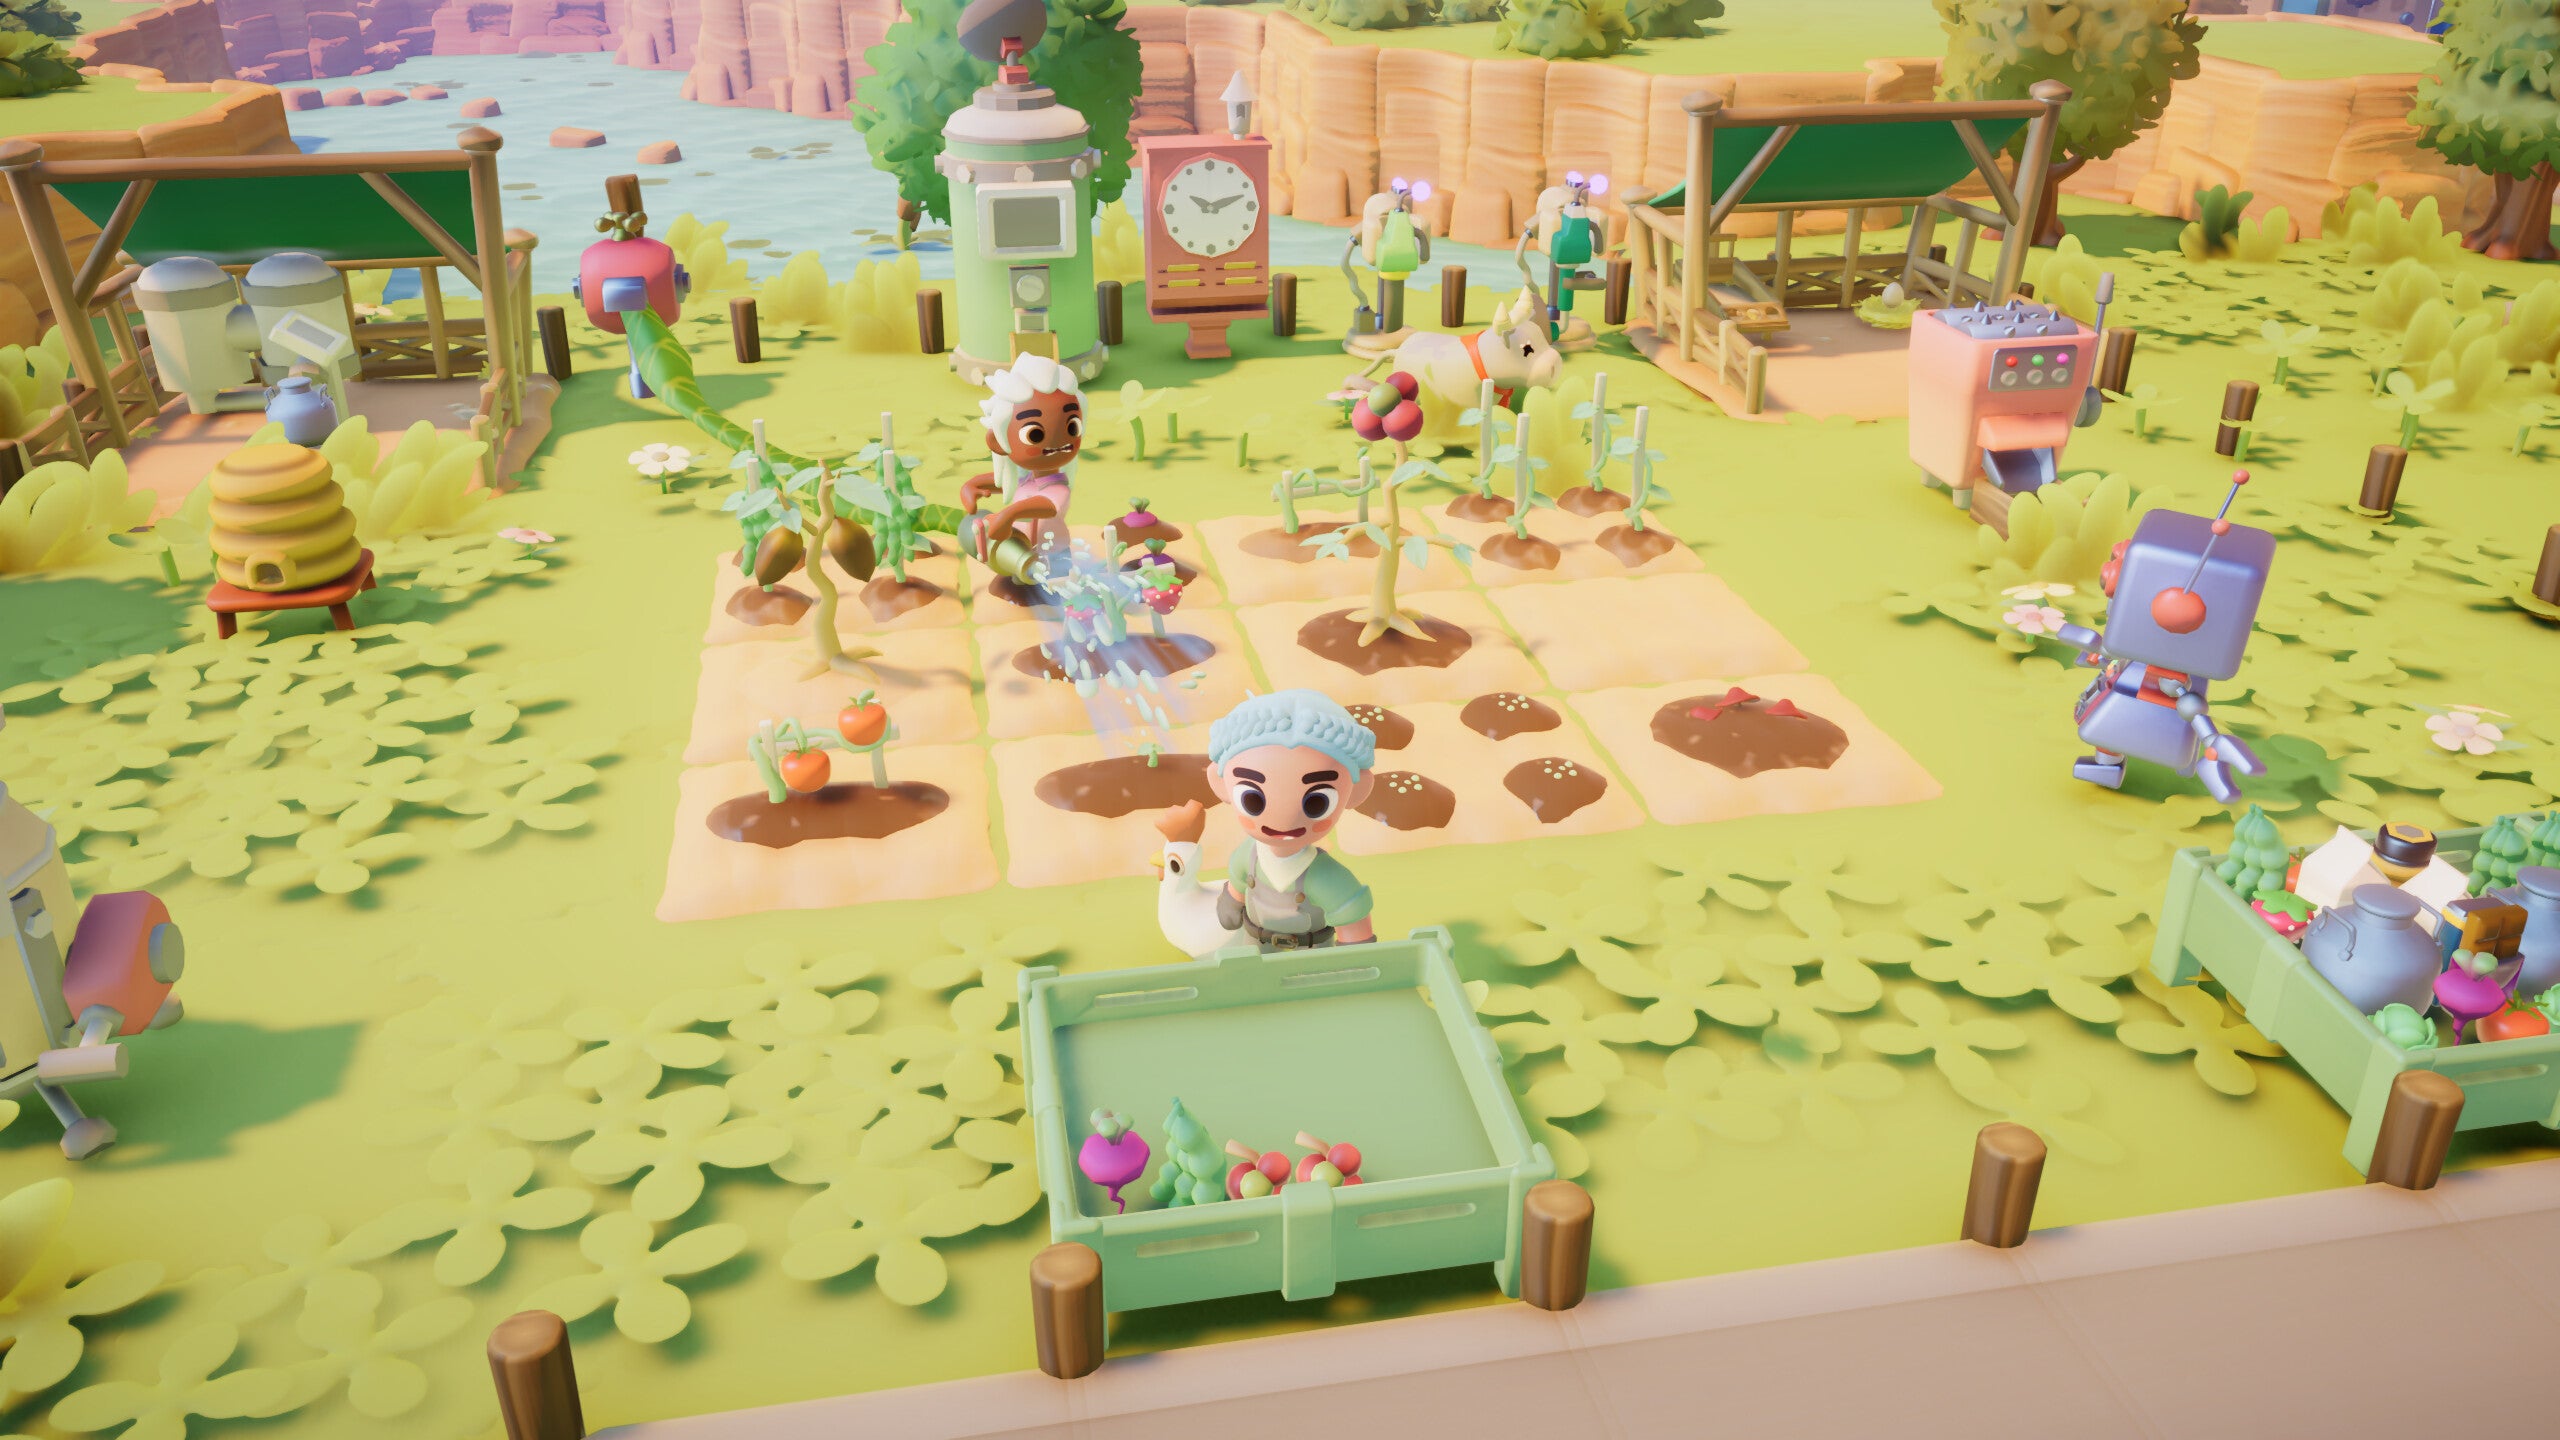 Go-Go Town! is a cosy Animal Crossing-like from the developers of Yonder